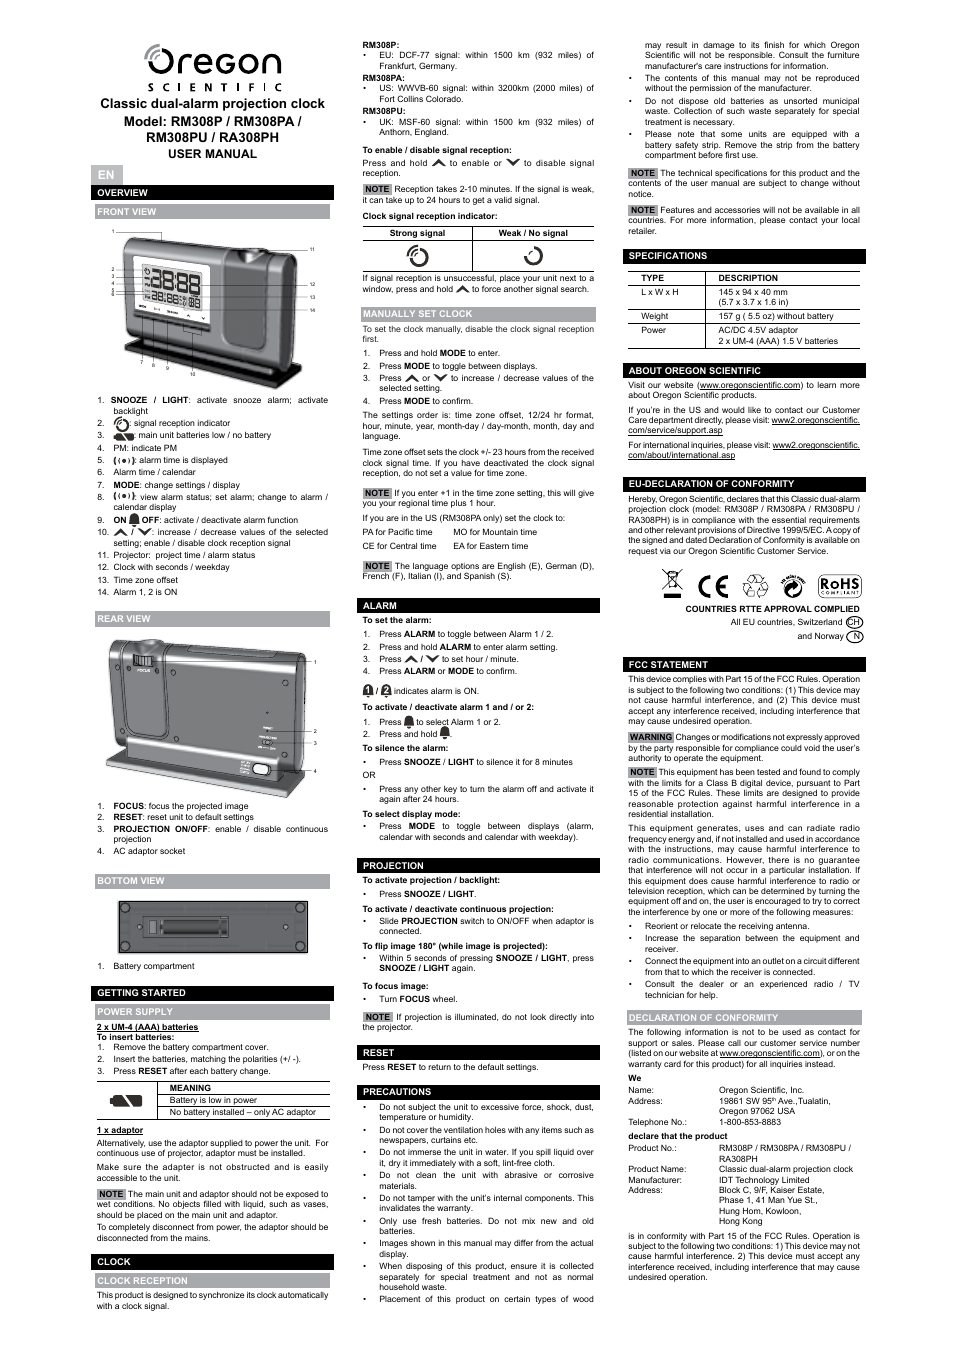 Oregon Scientific RA308PH User Manual | 8 pages | Original mode | Also for:  RM308PA, RM308PU, RM308P